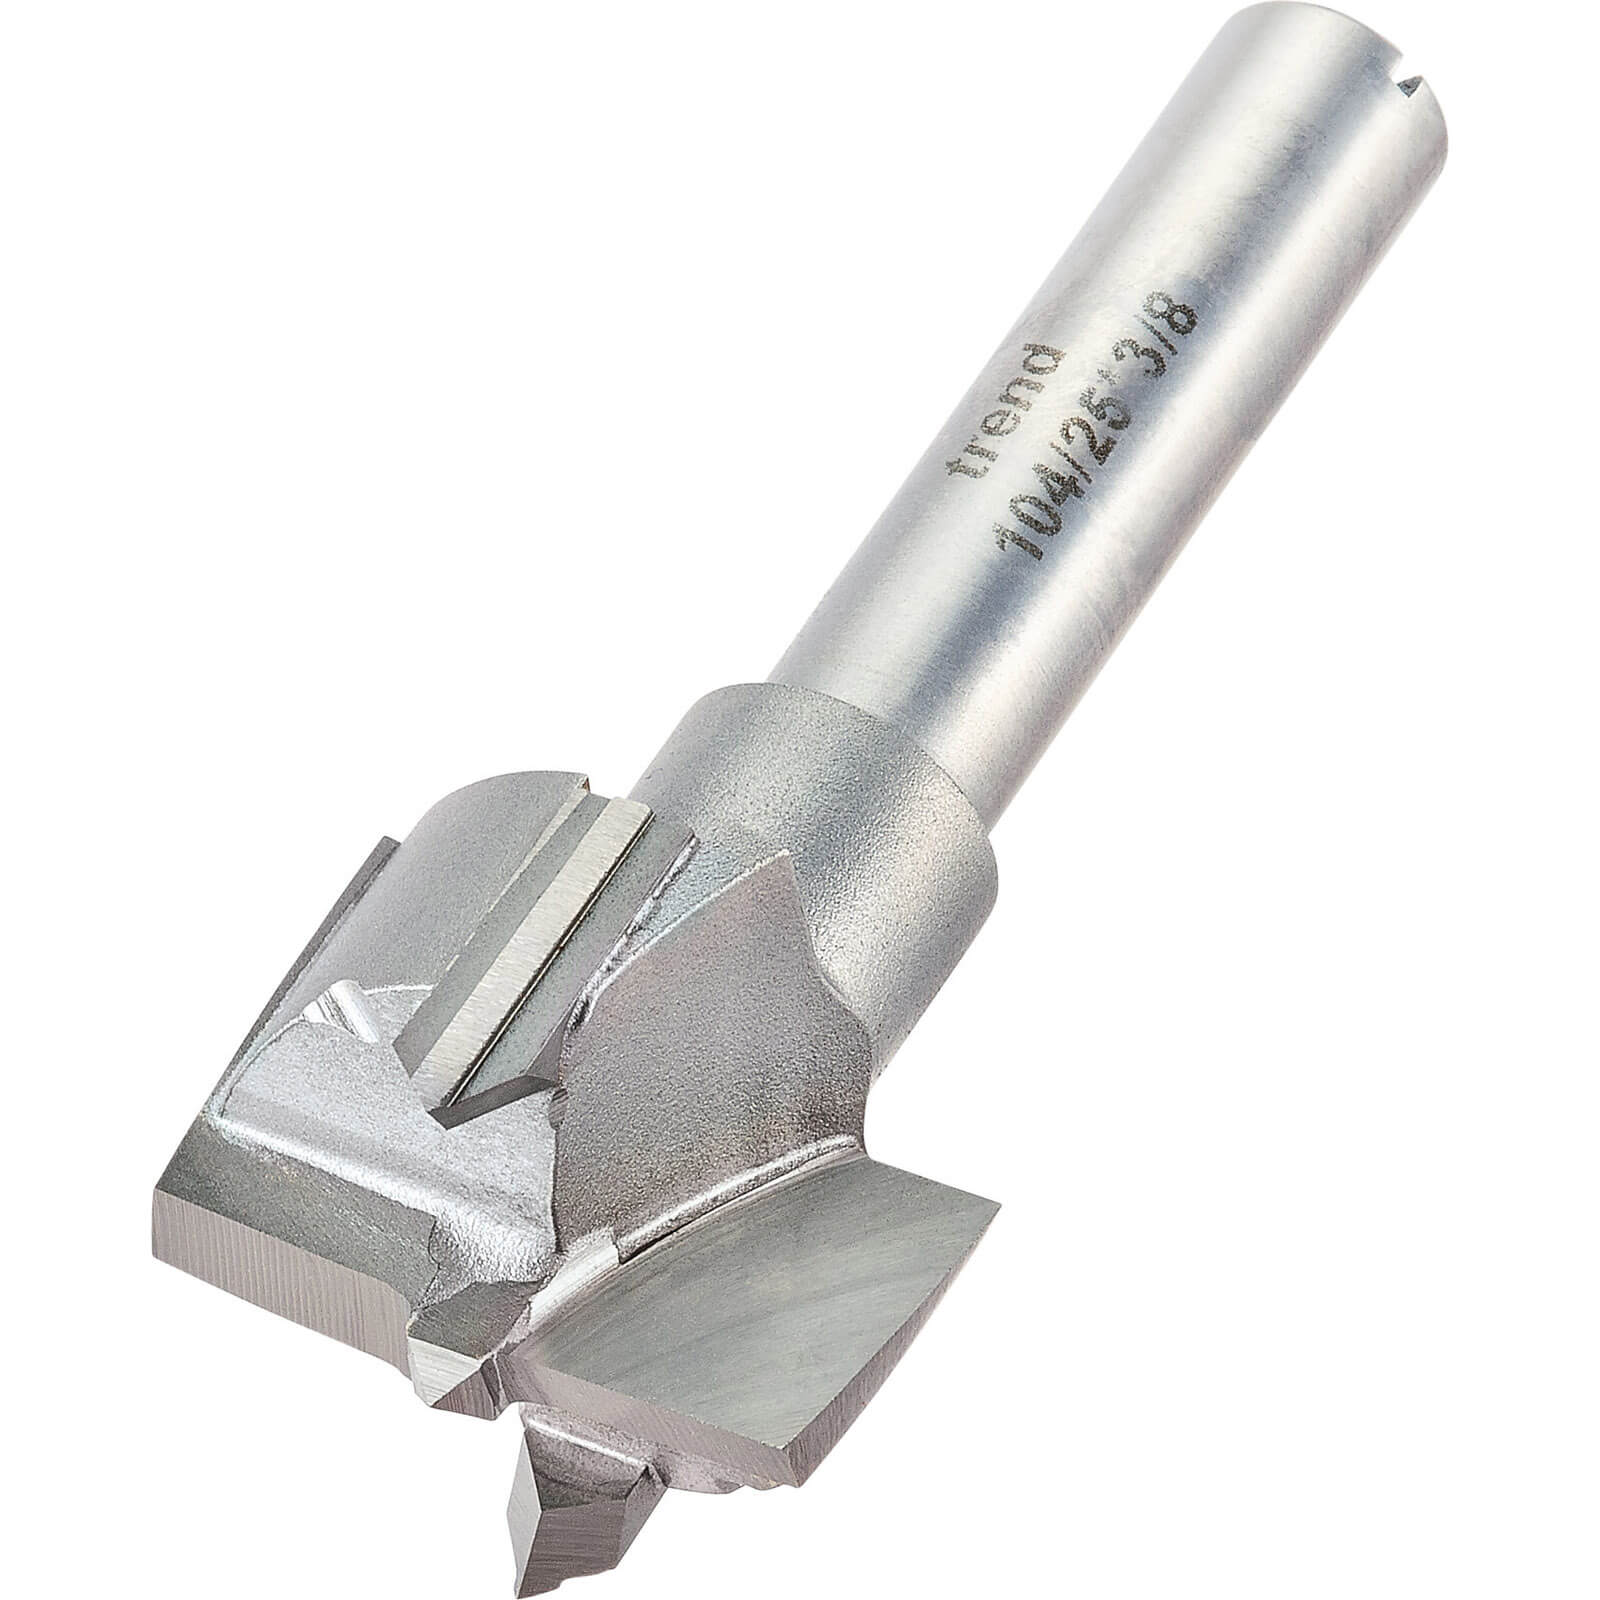 Image of Trend TCT Hinge Sinking Router Bit 25mm 3/8"